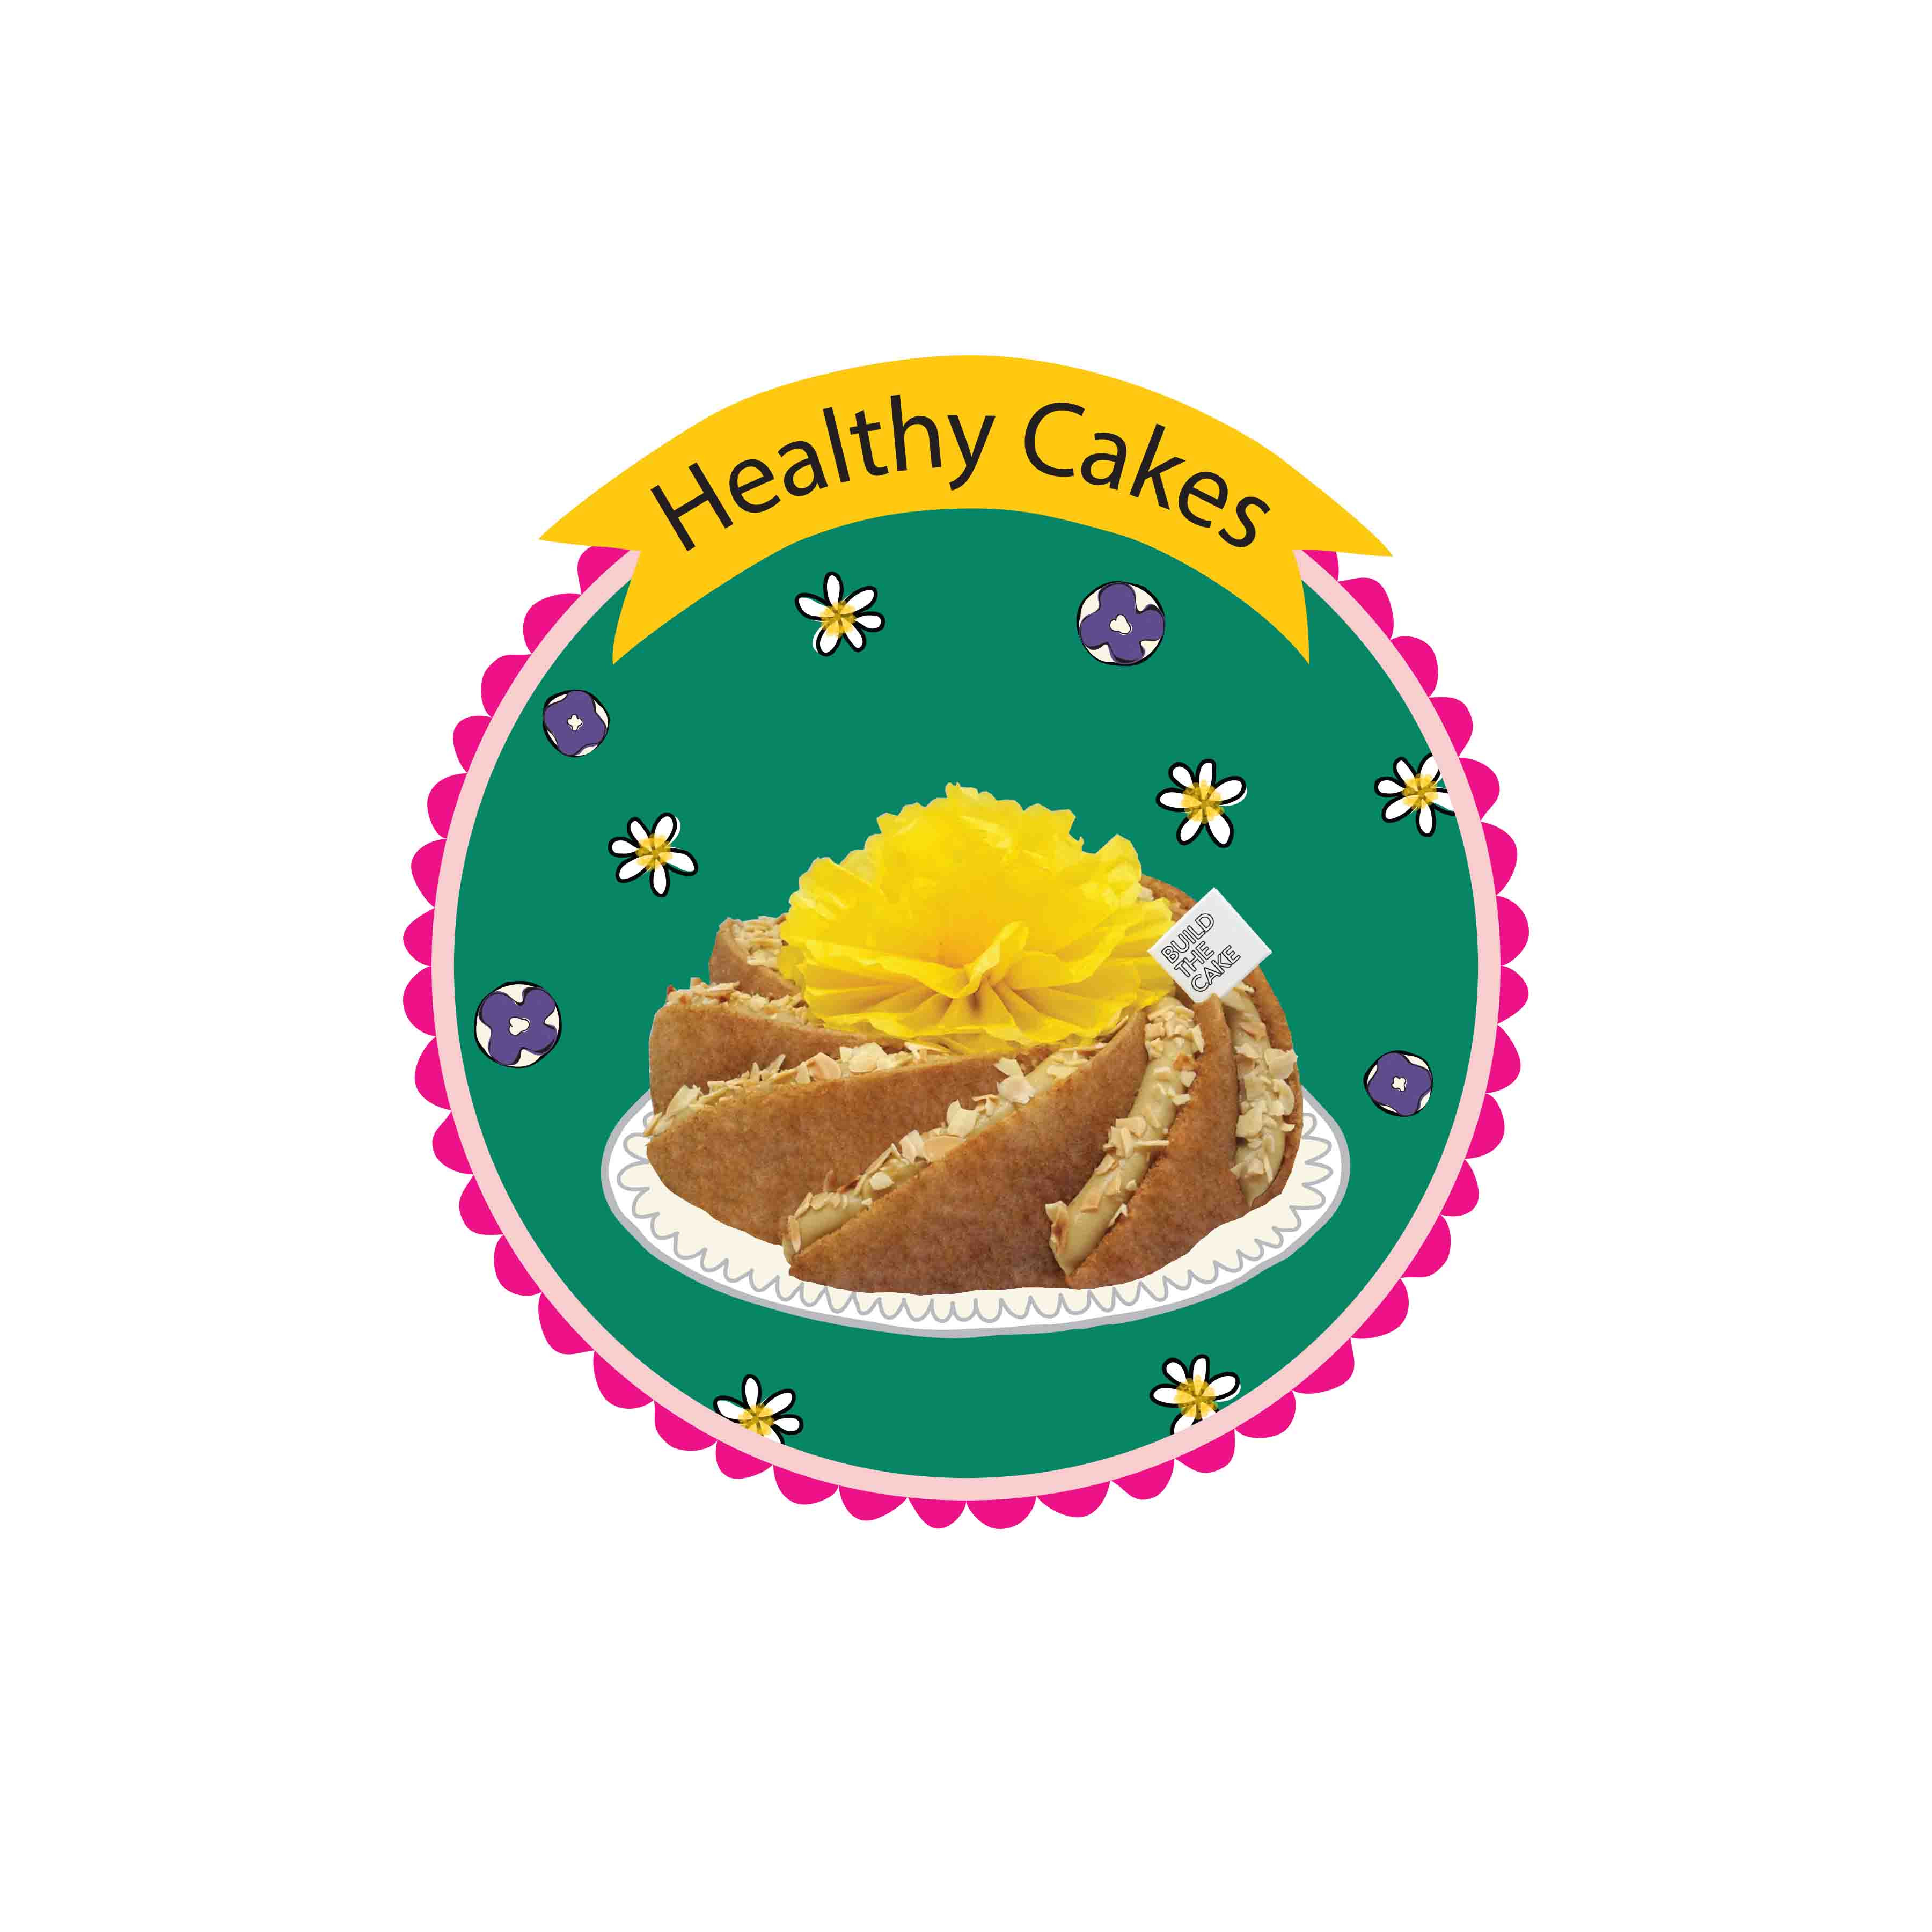 Healthy Cakes